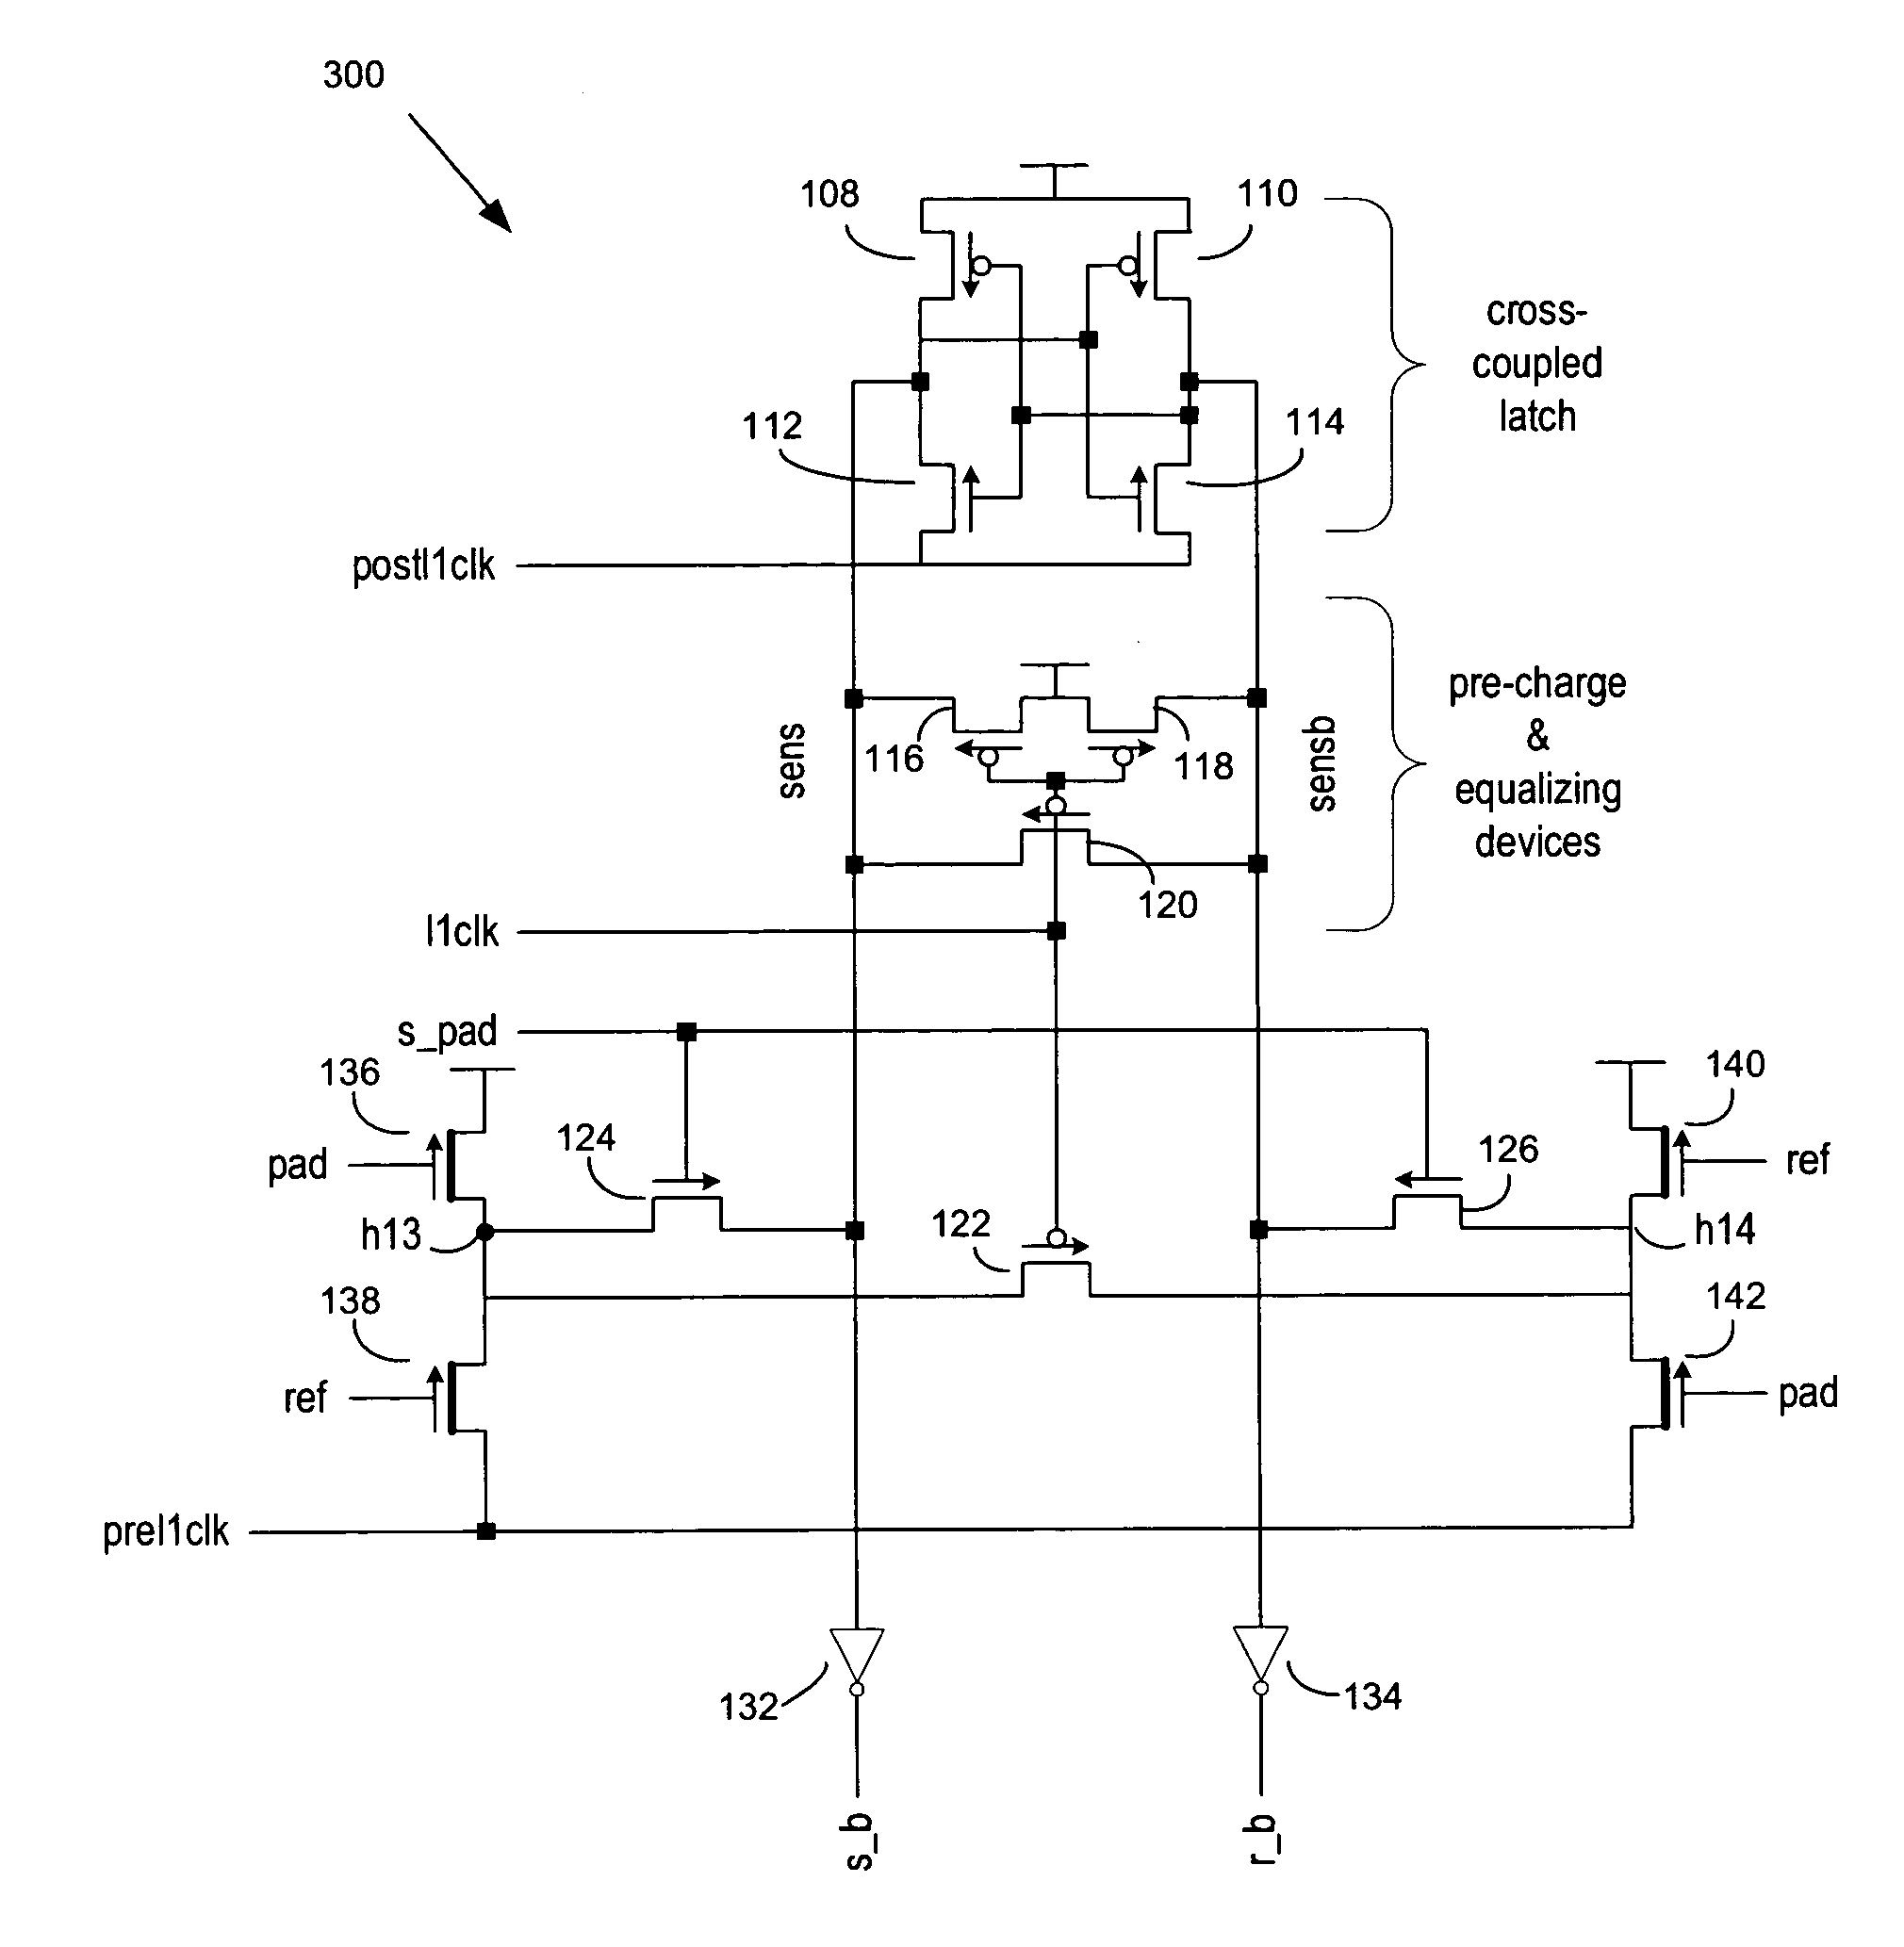 Differential sense amplifier latch for high common mode input